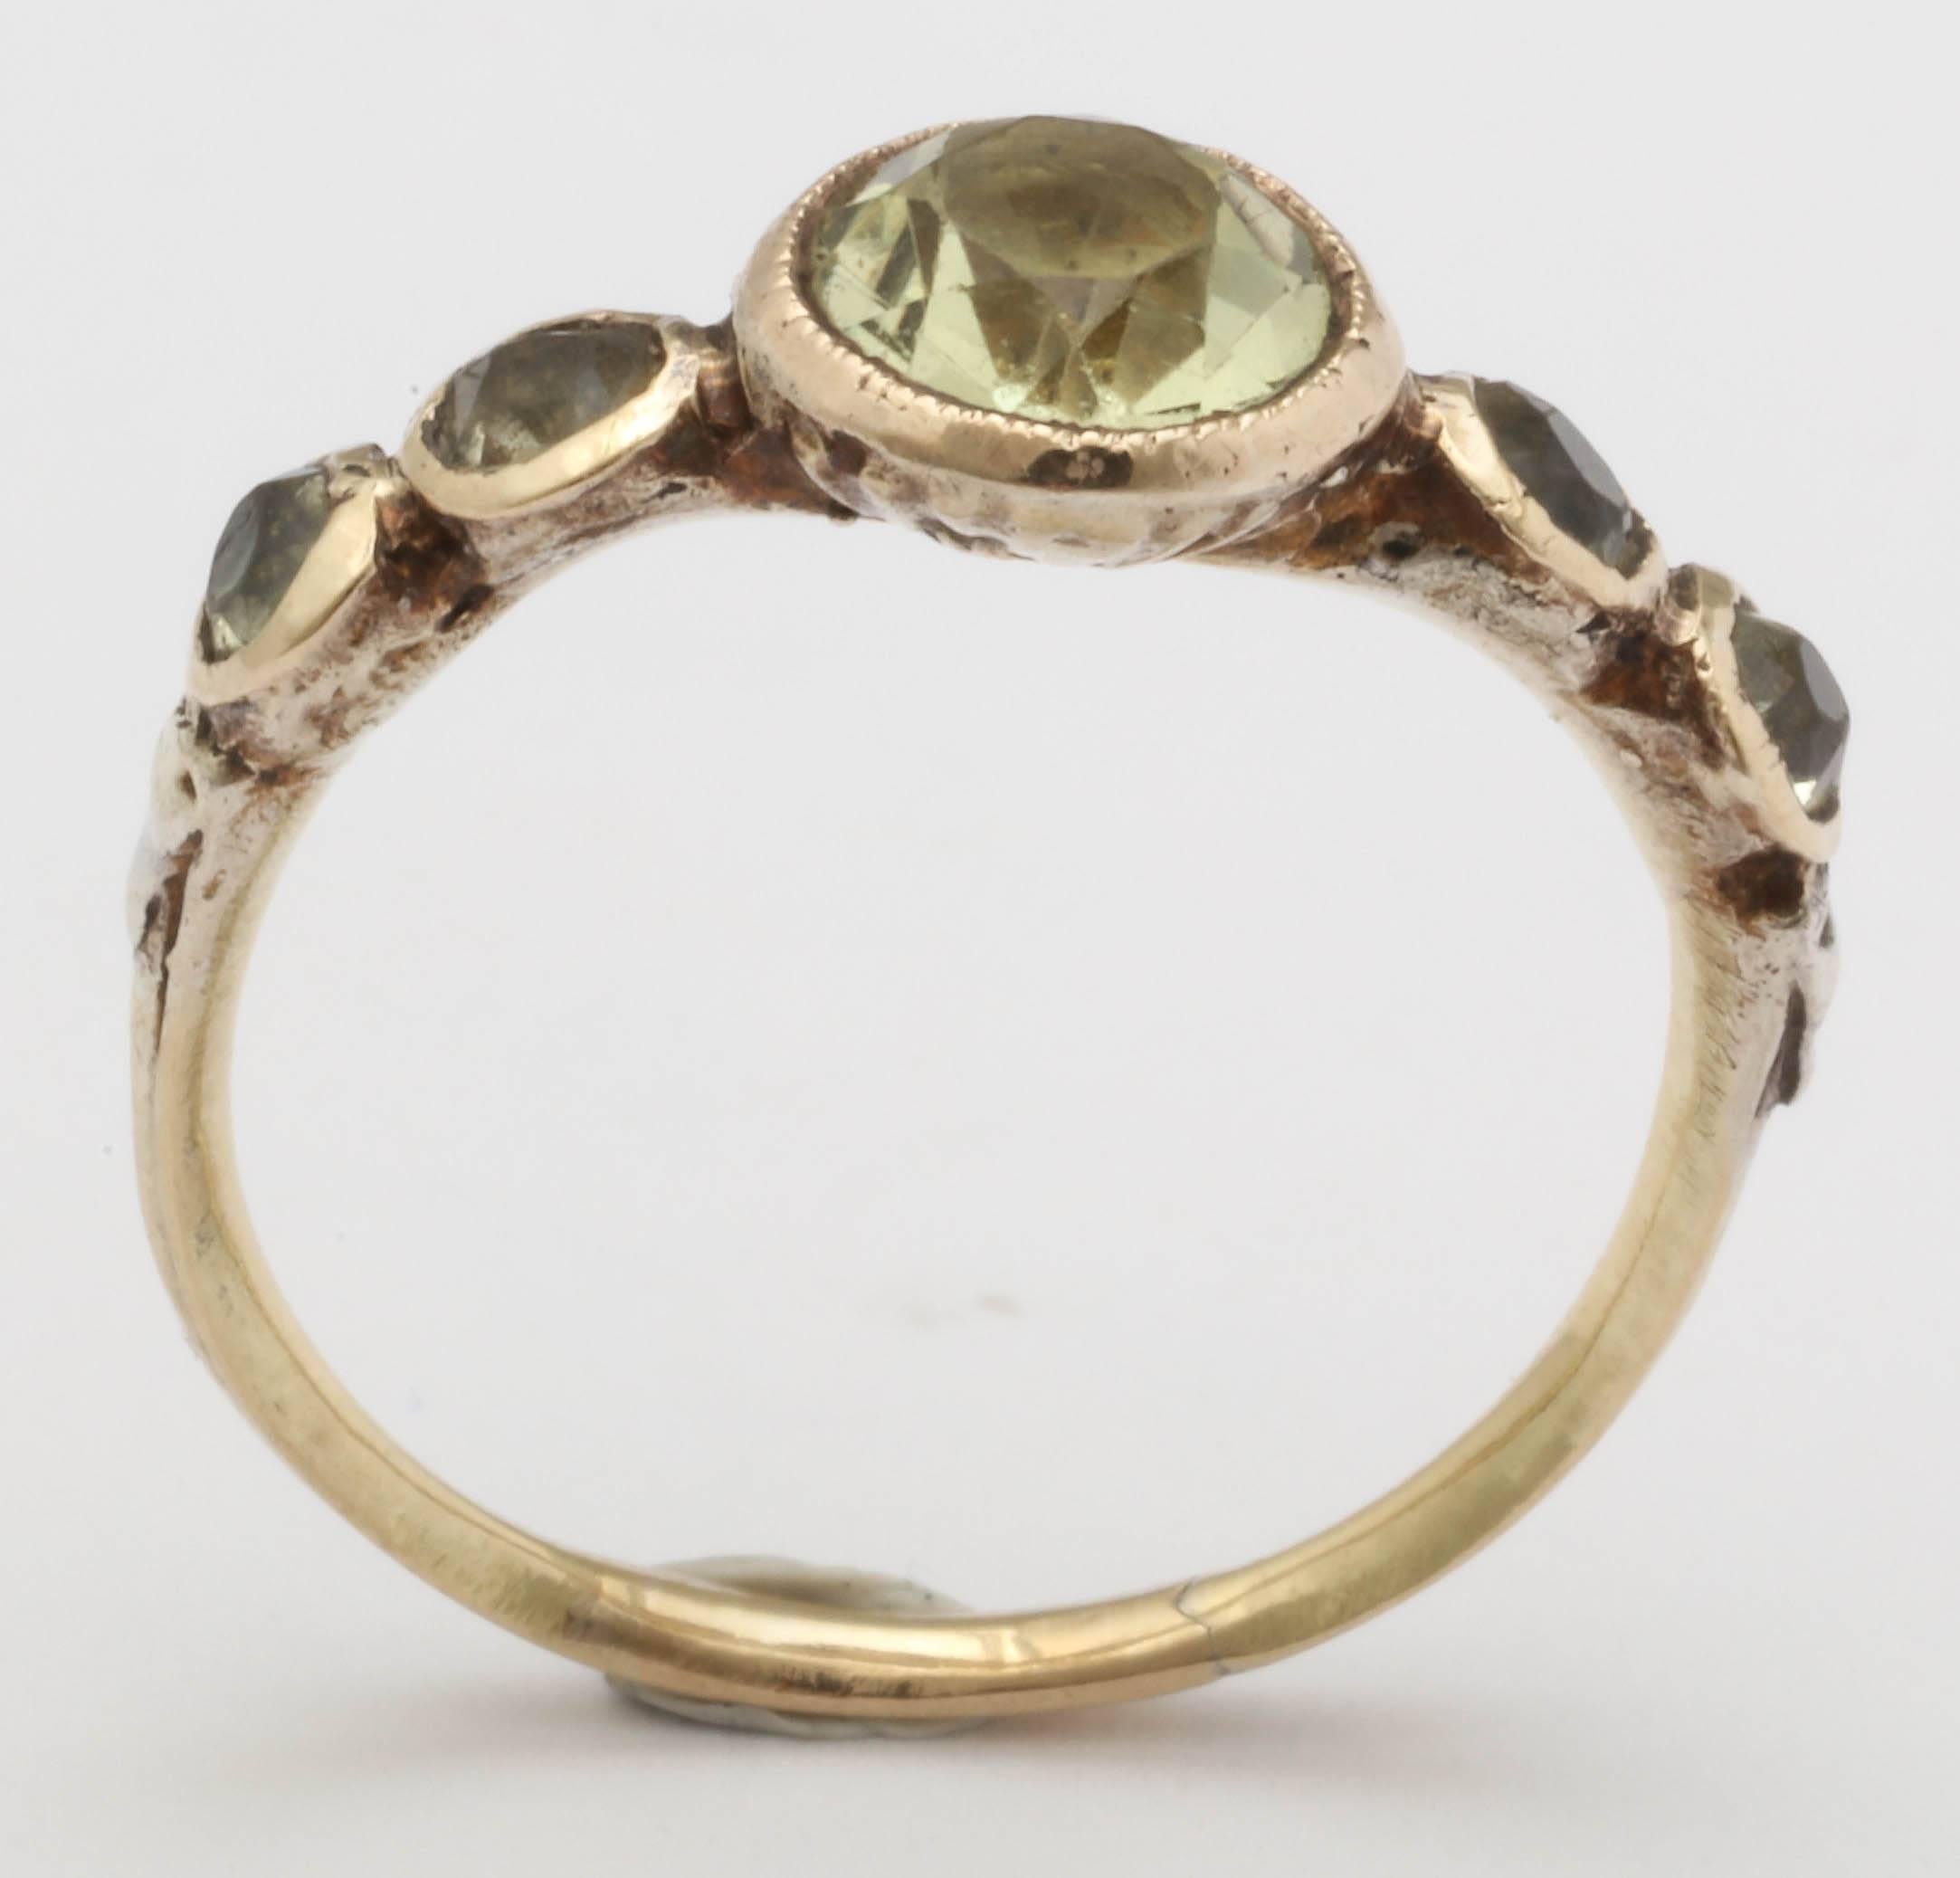 The chrysoberyl, with its vibrant light green coloration makes this ring a stunner. 5 stones set in a 15K closed back mount, made in England and dating to the Georgian era.